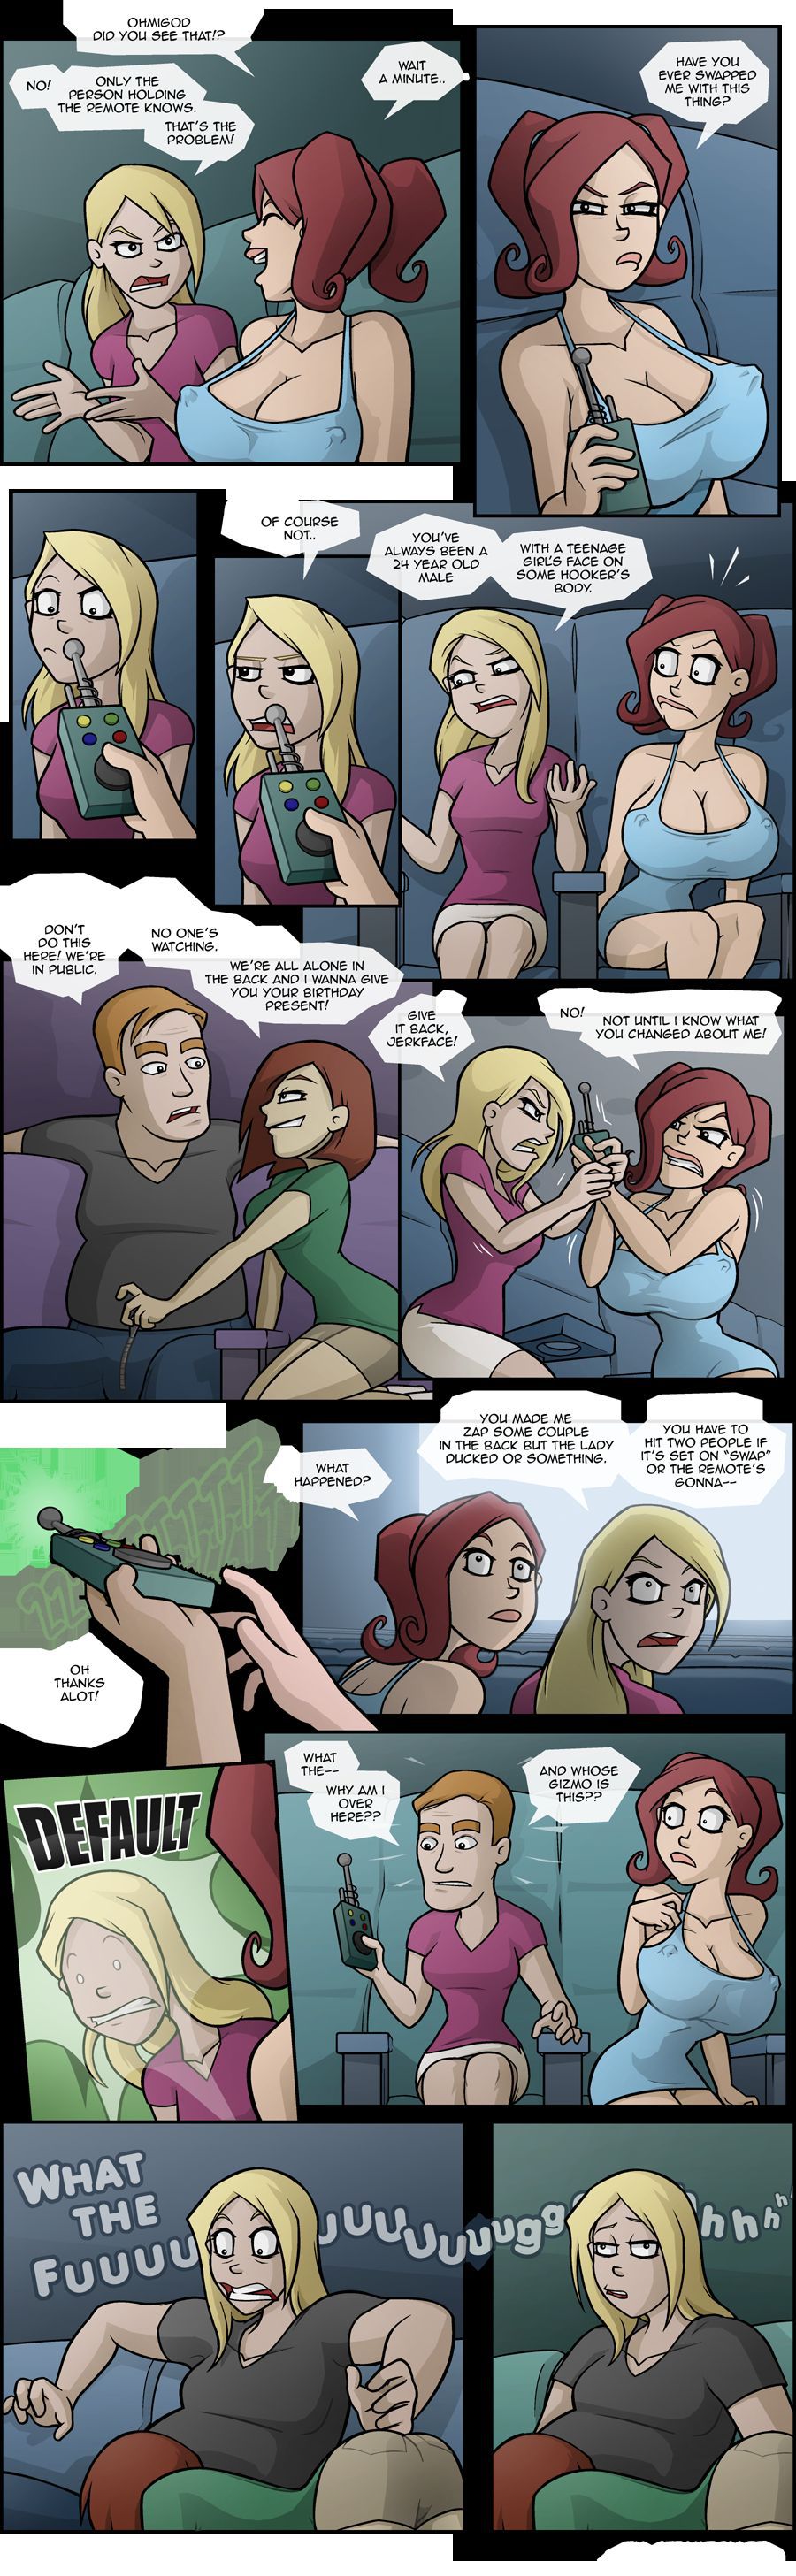 [Steamrolled] Crazy Girlfriend with Remote/New Girlfriend with Ray Gun (Ongoing) 13